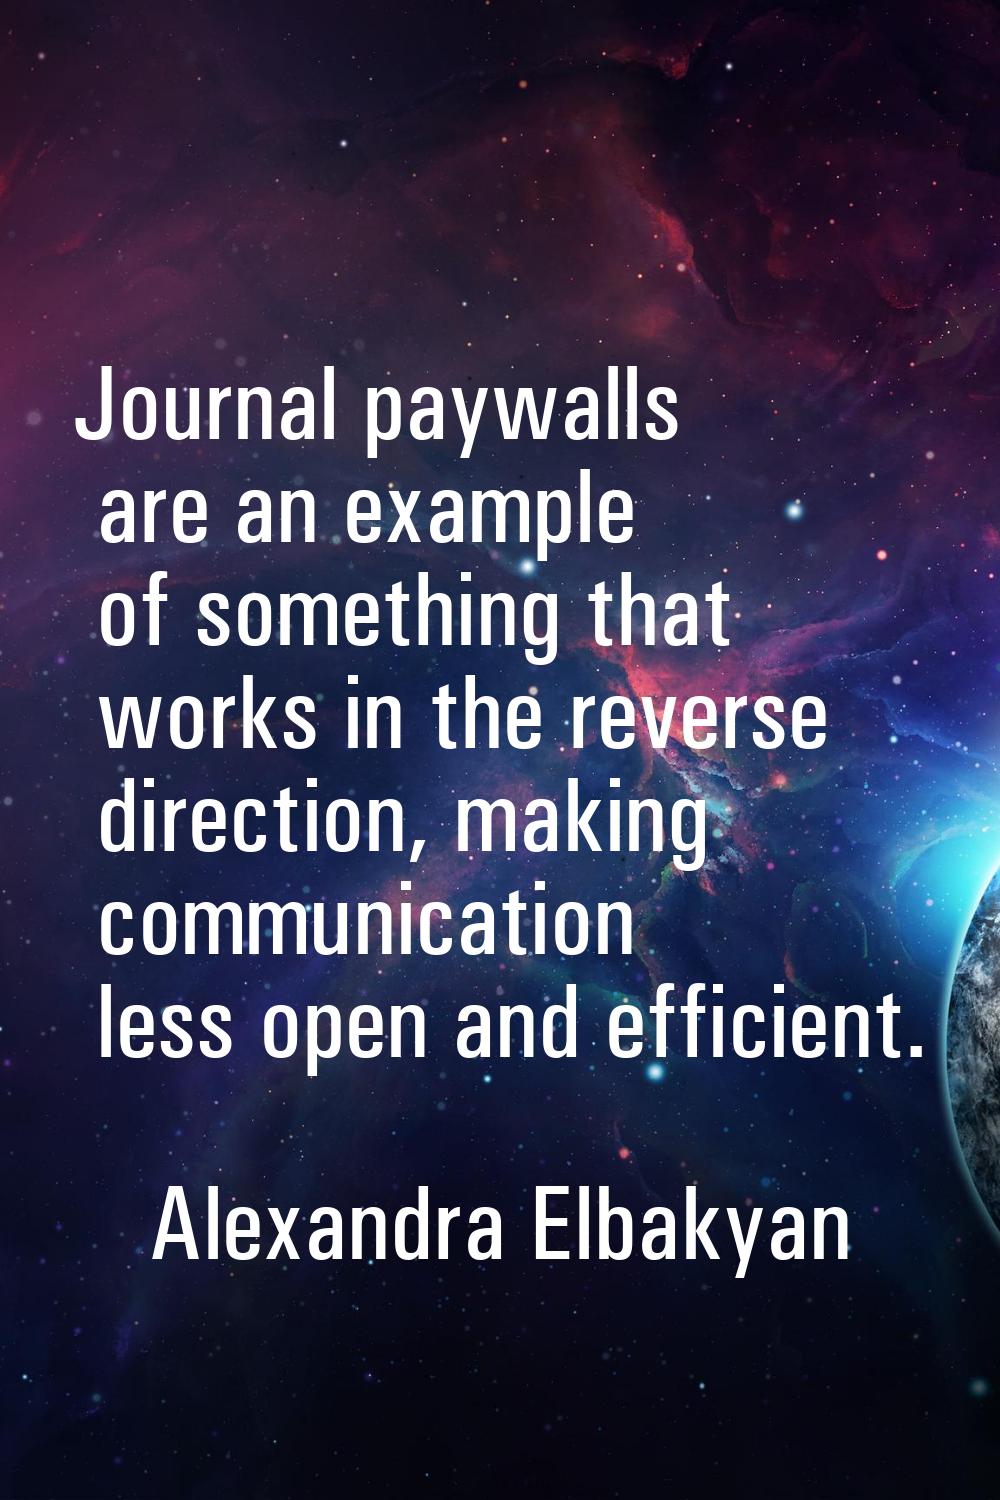 Journal paywalls are an example of something that works in the reverse direction, making communicat